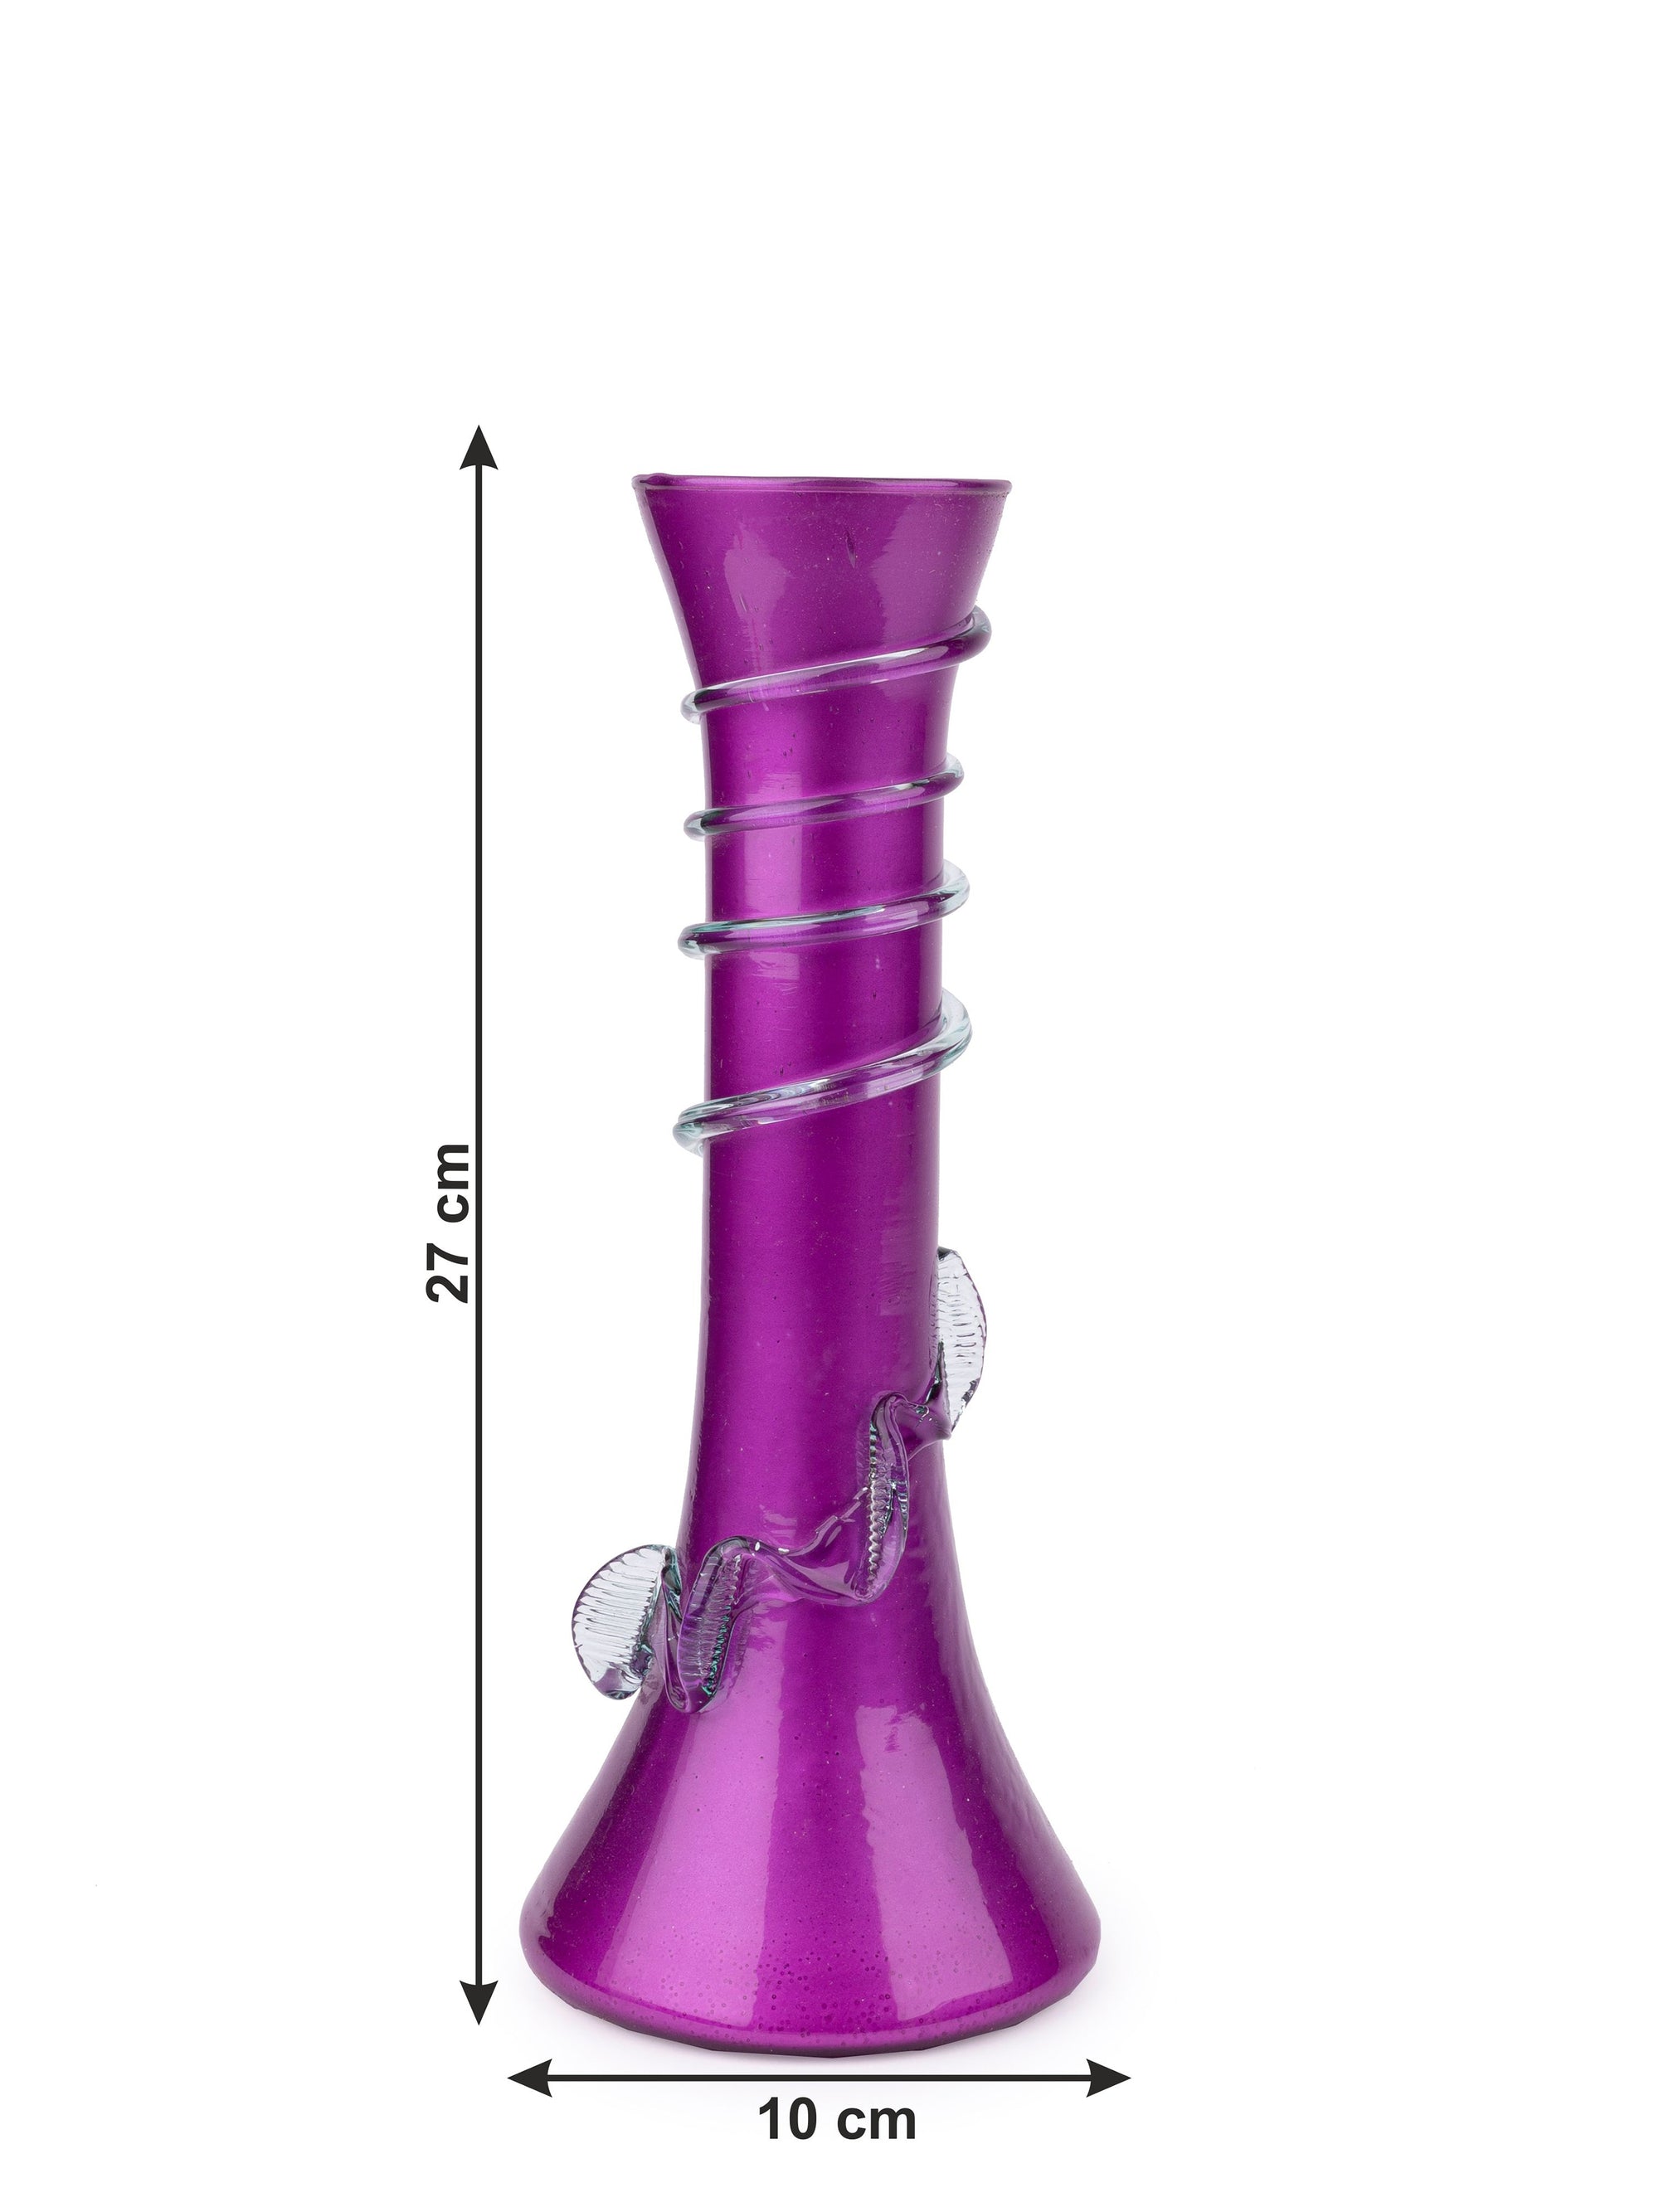 Glass Crafted Purple Flower Vase with Spiral Design - 11 inches Height - The Heritage Artifacts